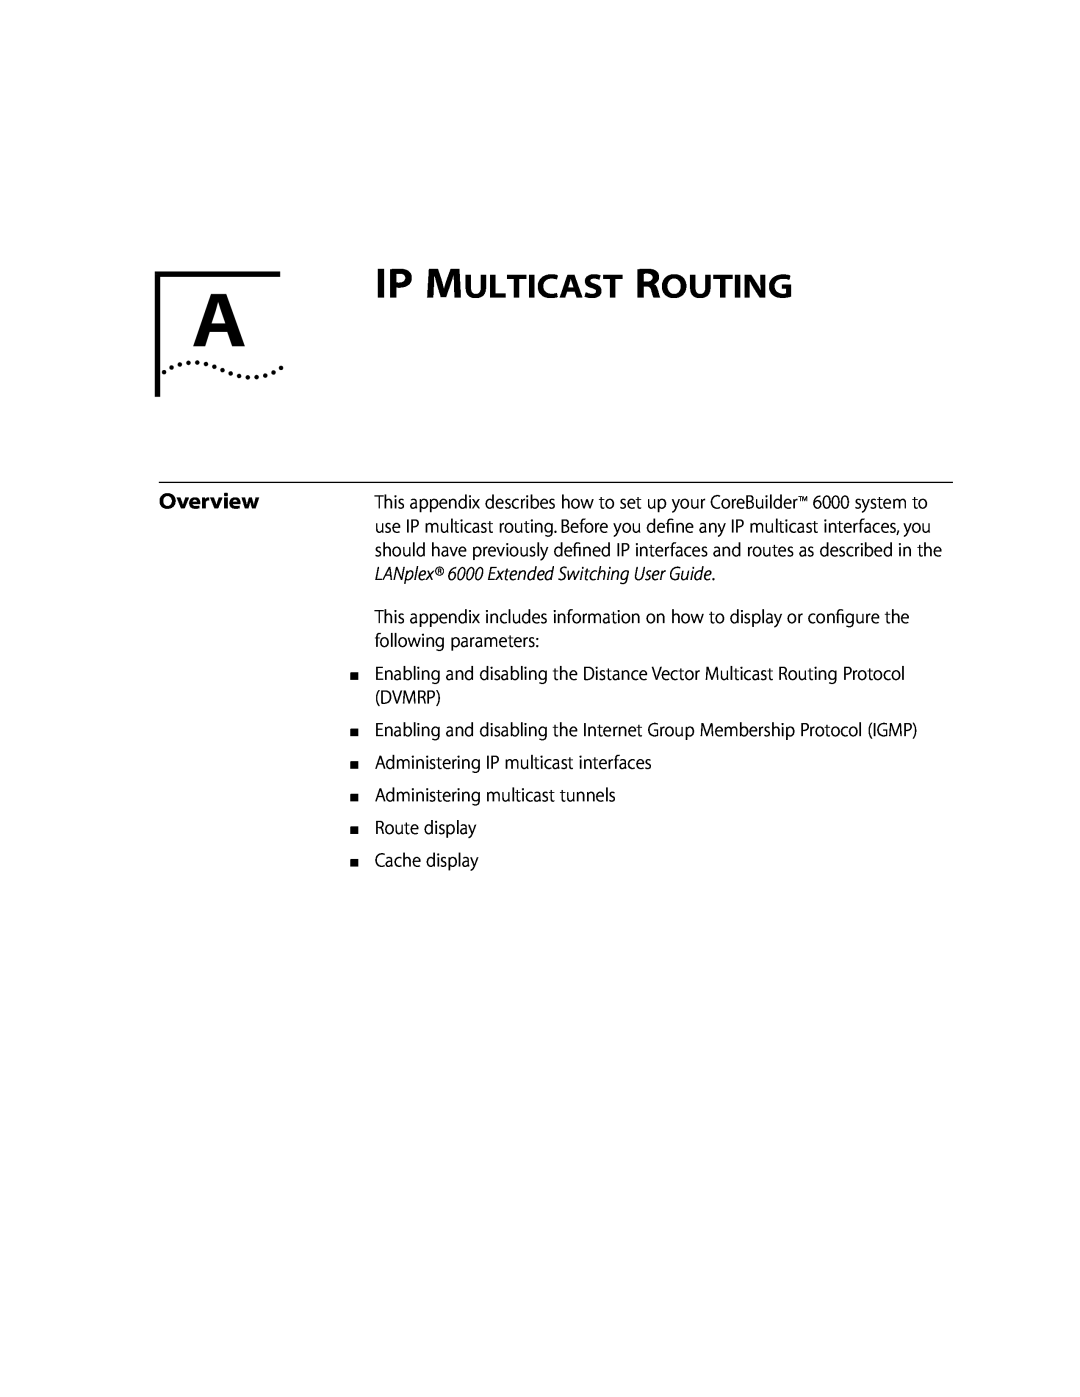 3Com 10002211 manual Ip Multicast Routing, Overview, LANplex 6000 Extended Switching User Guide 